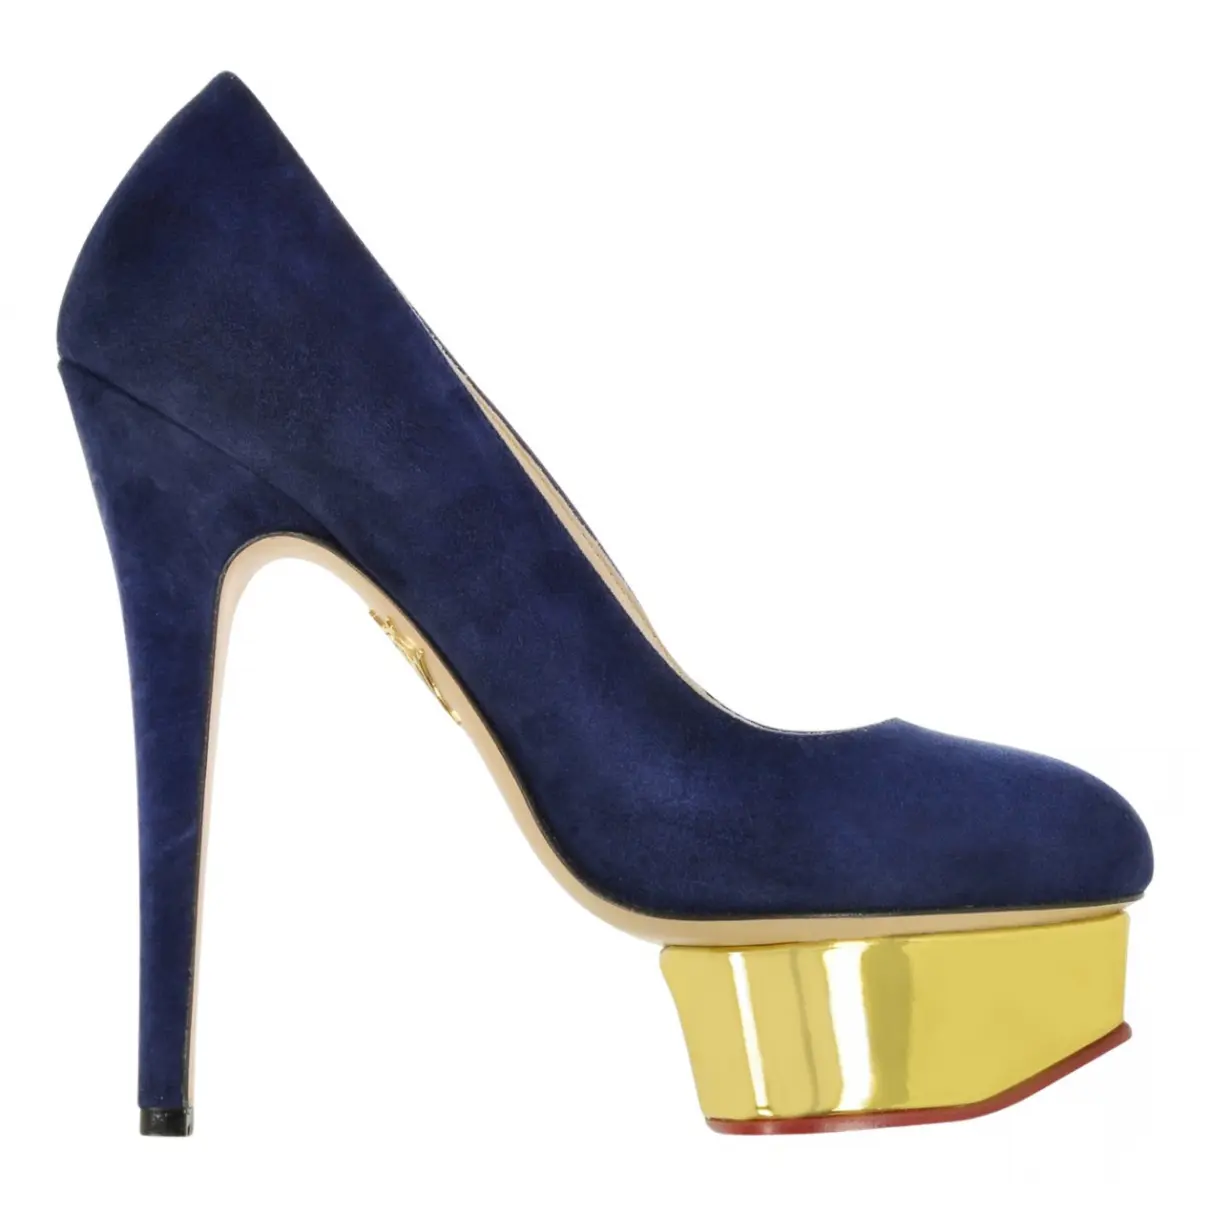 Buy Charlotte Olympia Dolly leather heels online